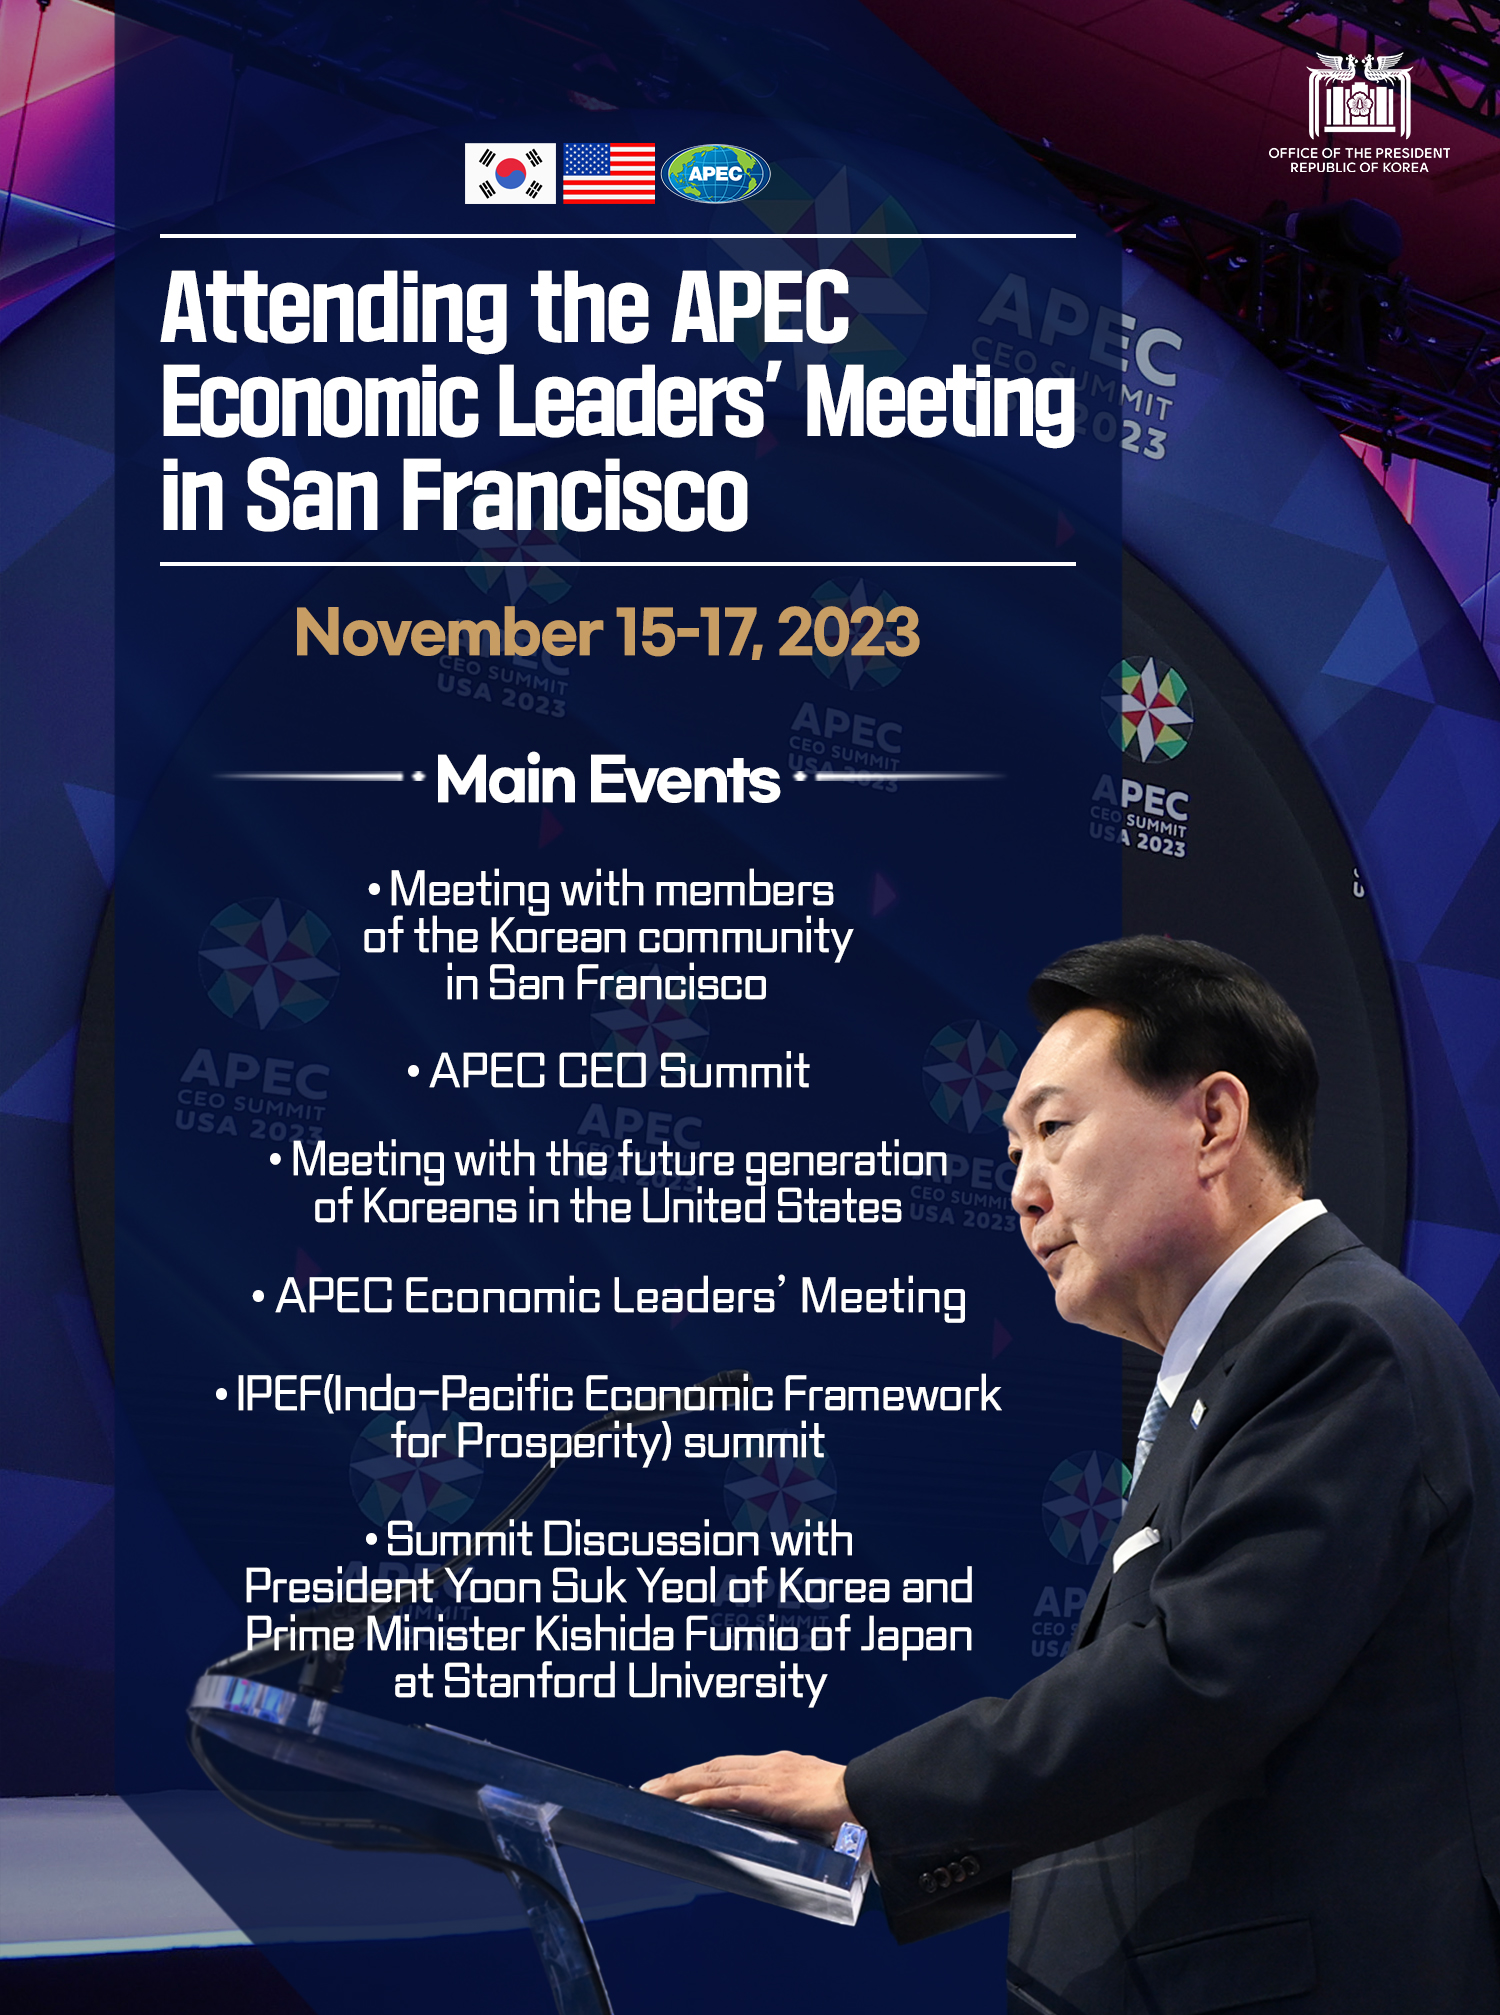 Attending the APEC Economic Leaders' Meeting in San Francisco